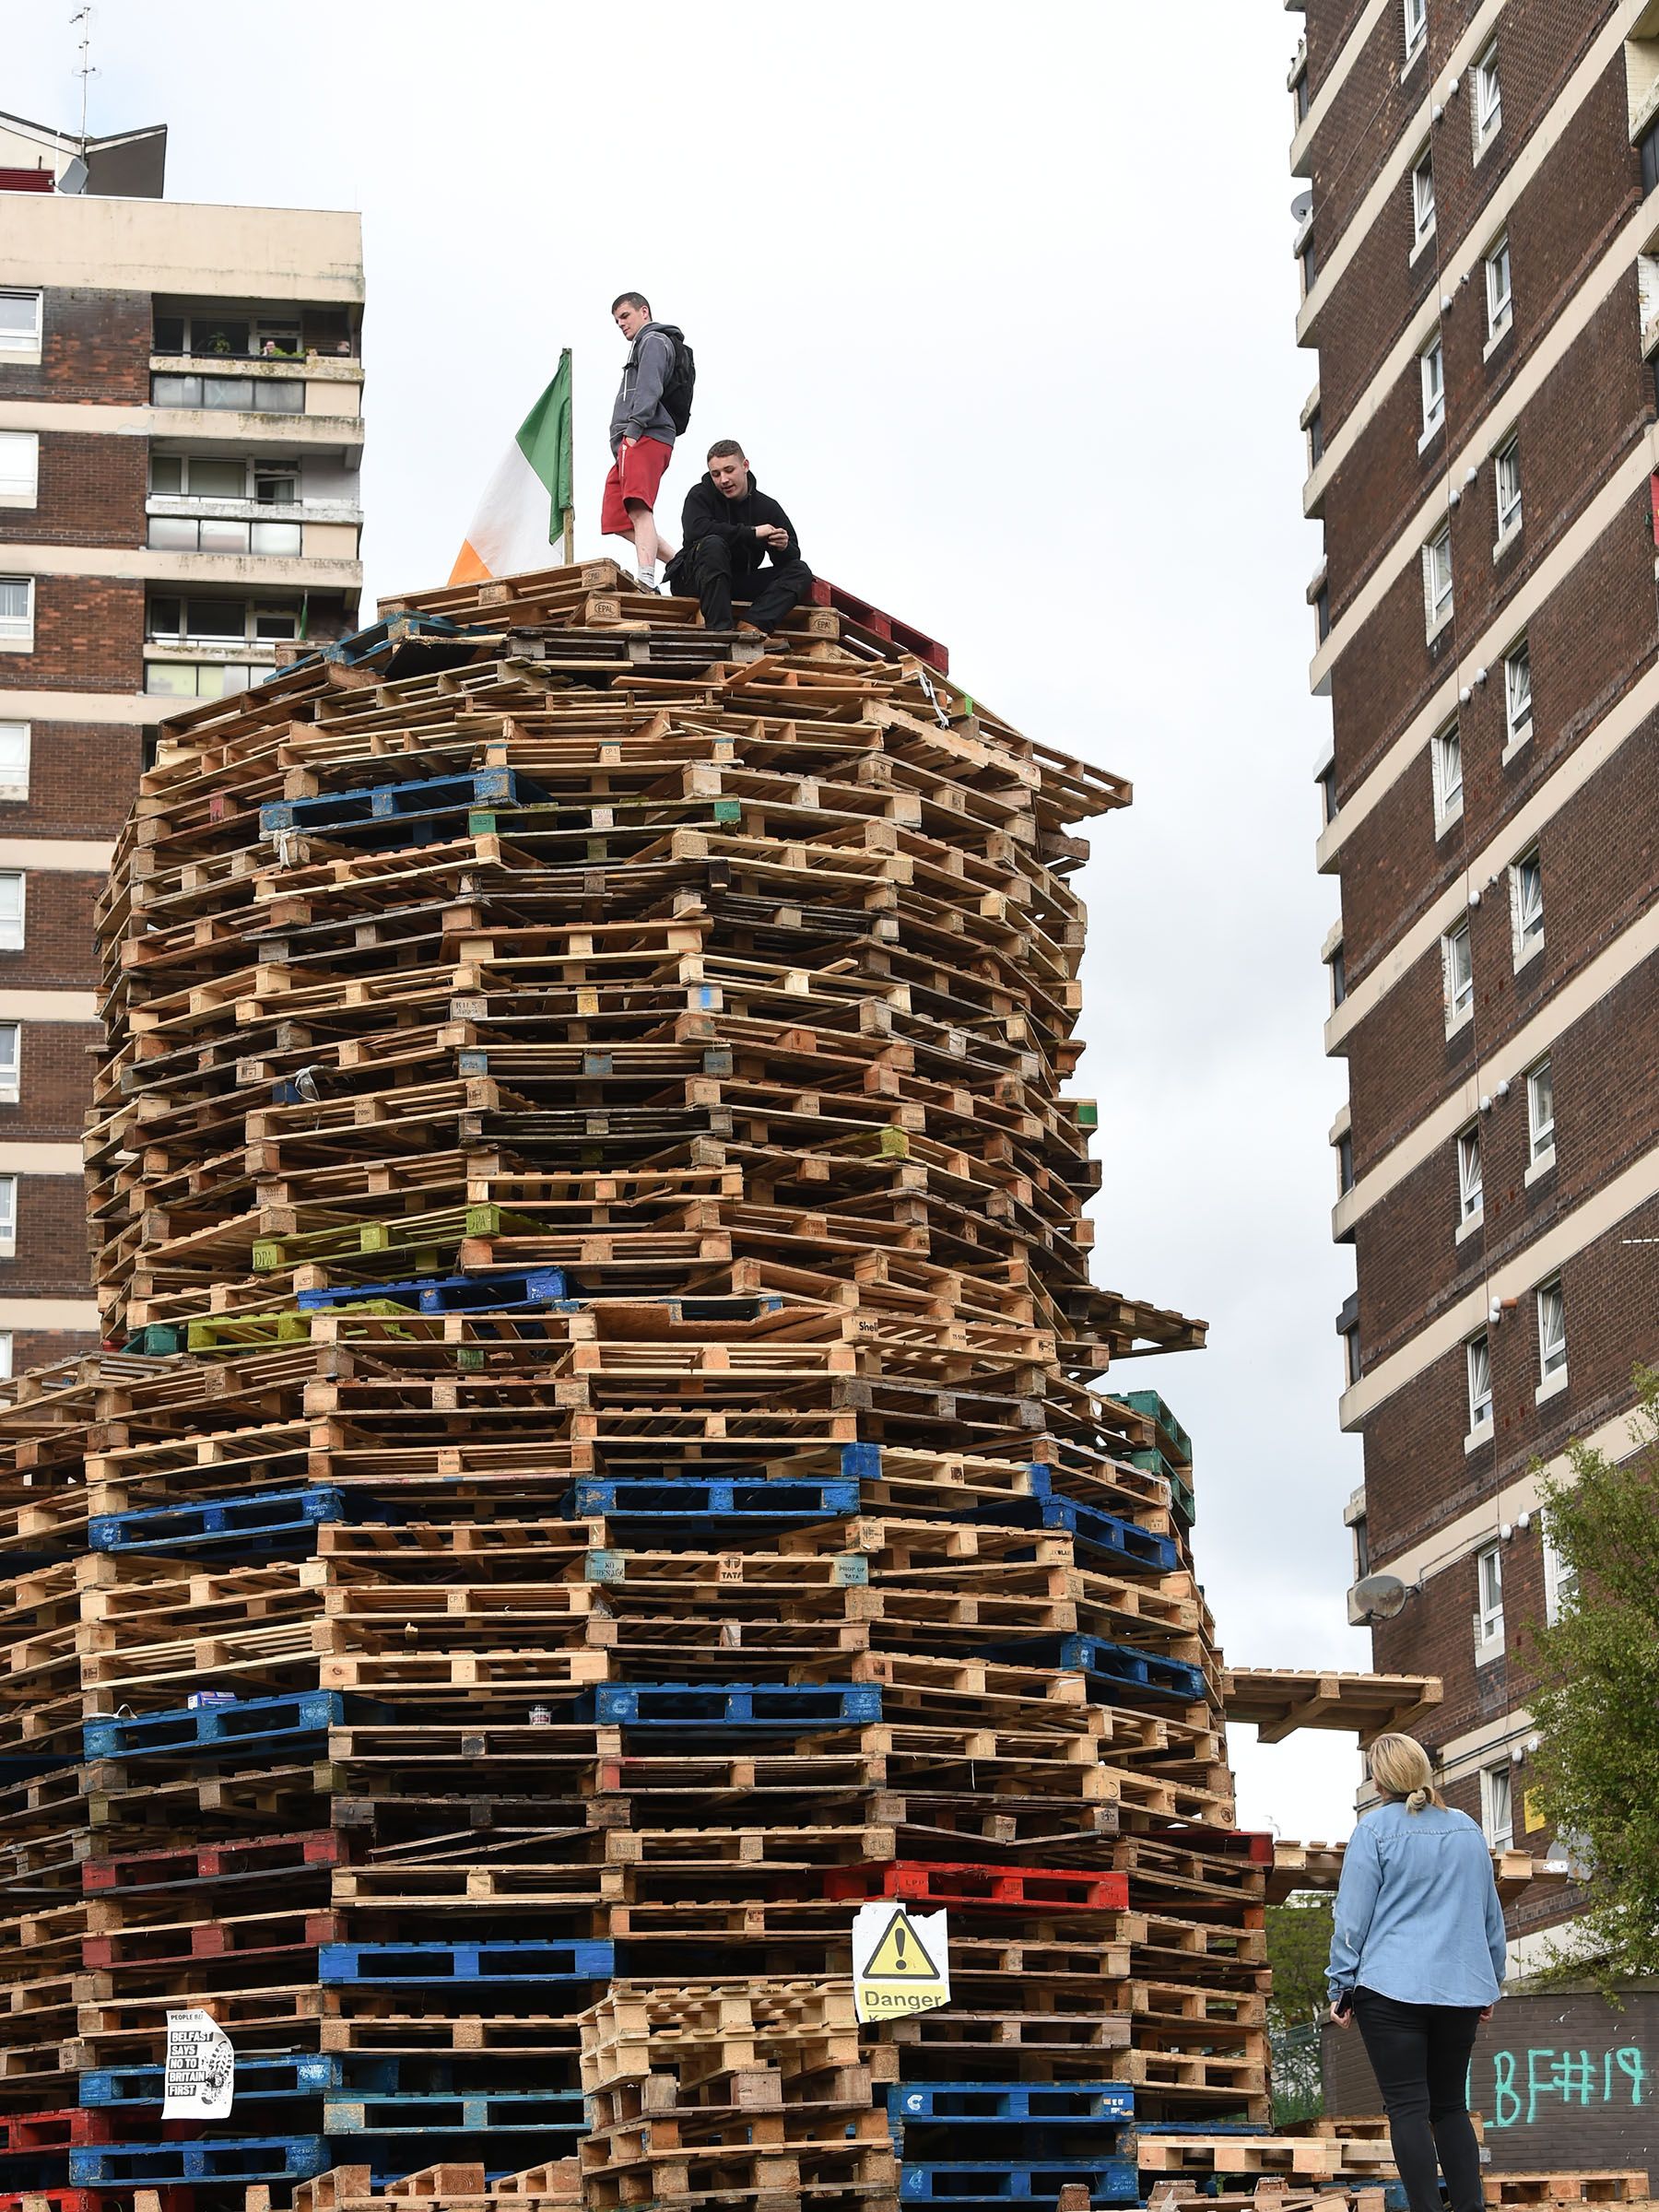 RESIDENTS TERRORISED: The 2019 bonfire built by anti-social elements in the New Lodge in August 2019